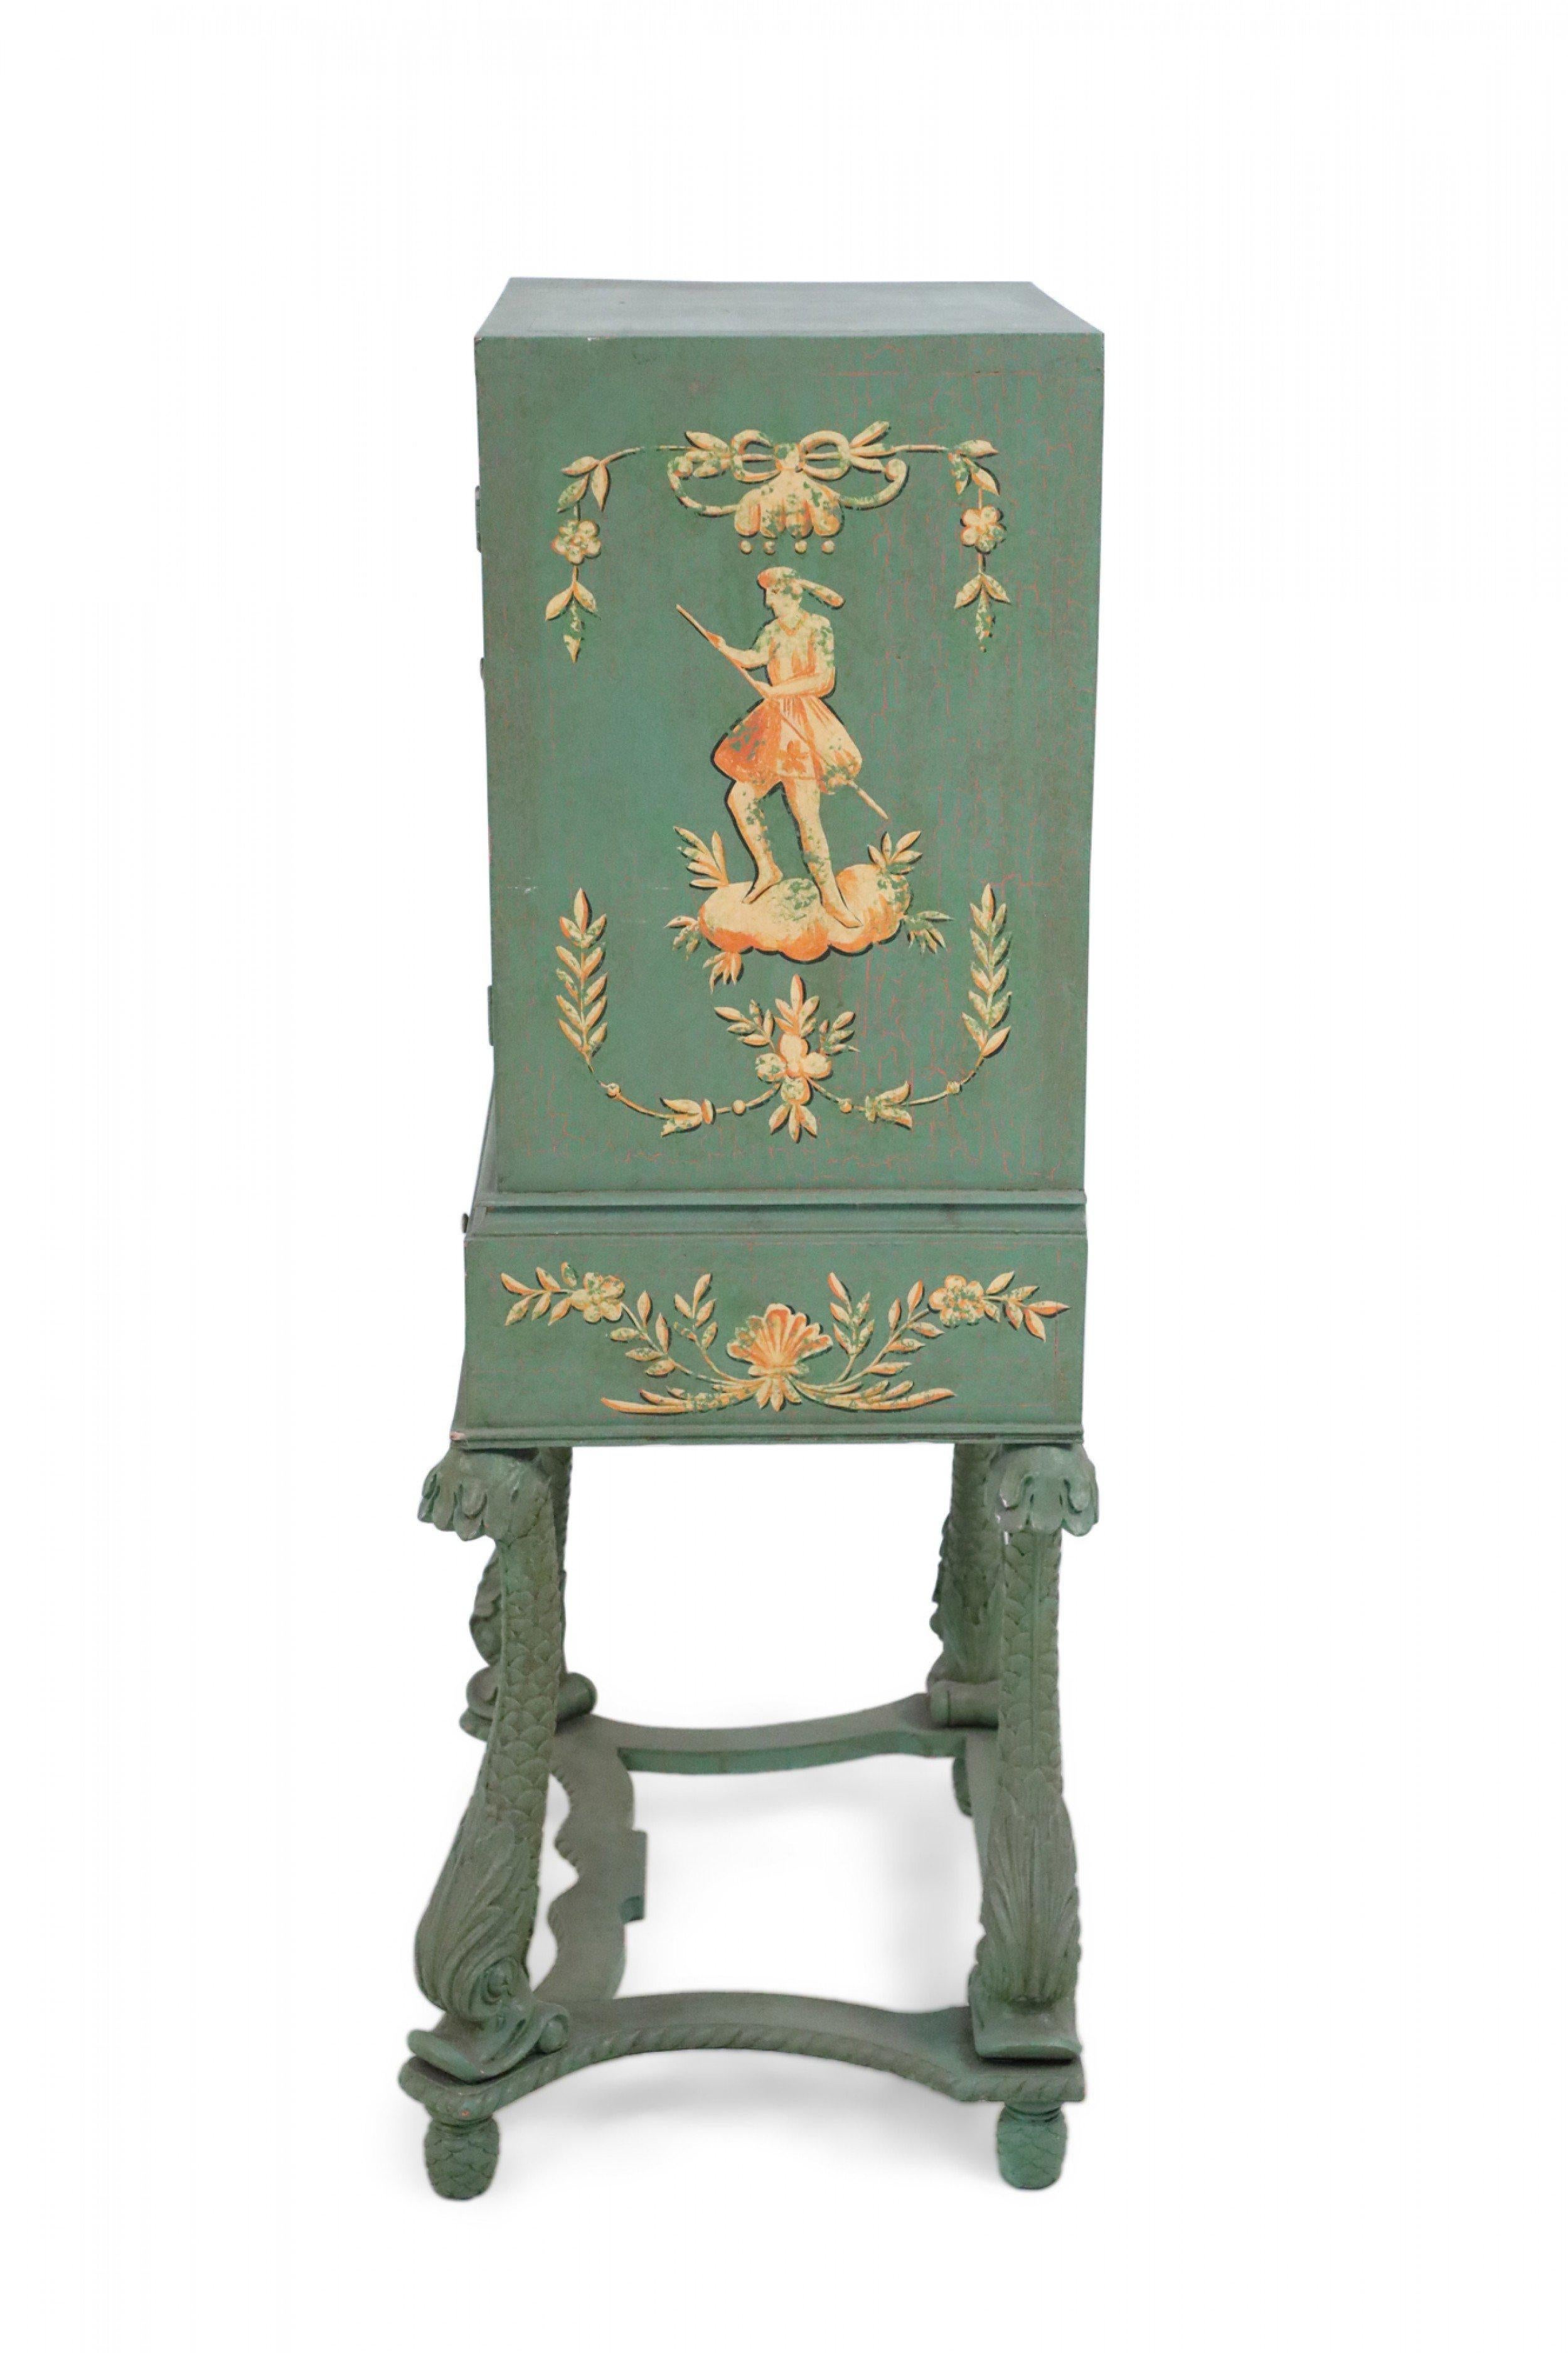 Vintage Chinese green high-boy painted with orange pastoral scenes on the sides and front cabinet doors, above a fish-scaled drawer with a scrolled apron featuring shells and florals, supported on carved fish-scale and head legs connected by a